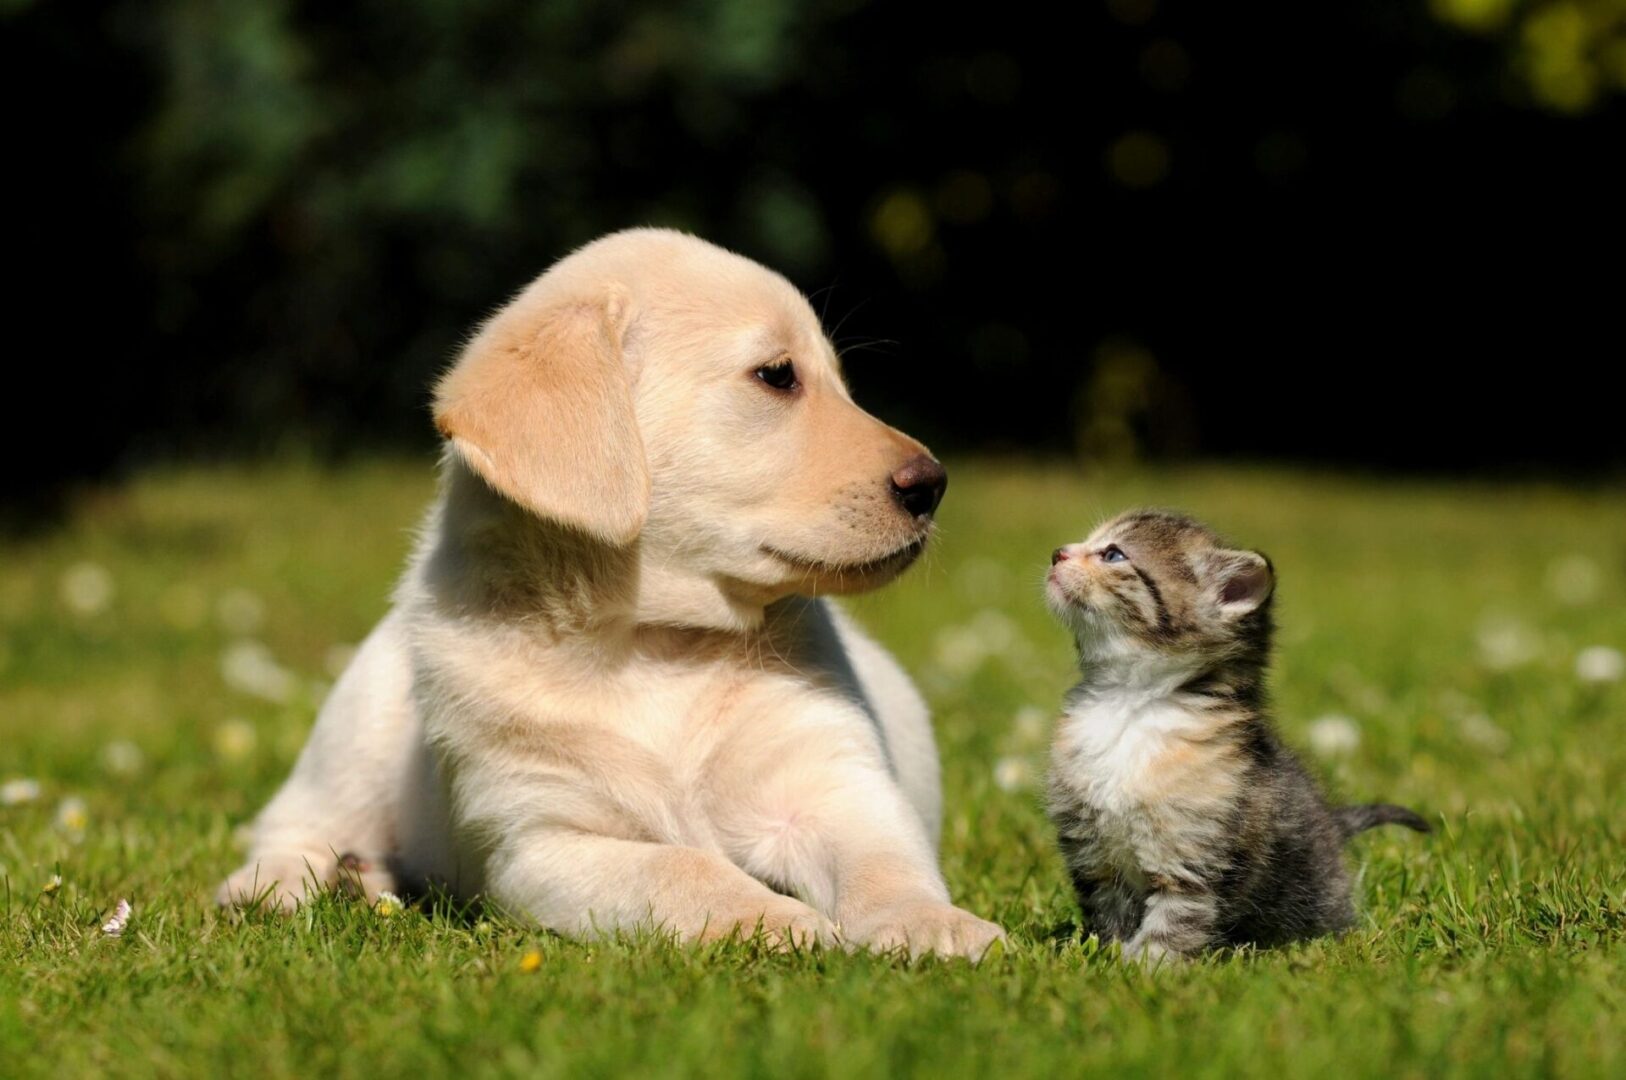 The ChaufFURs puppy and a kitten looking at one another